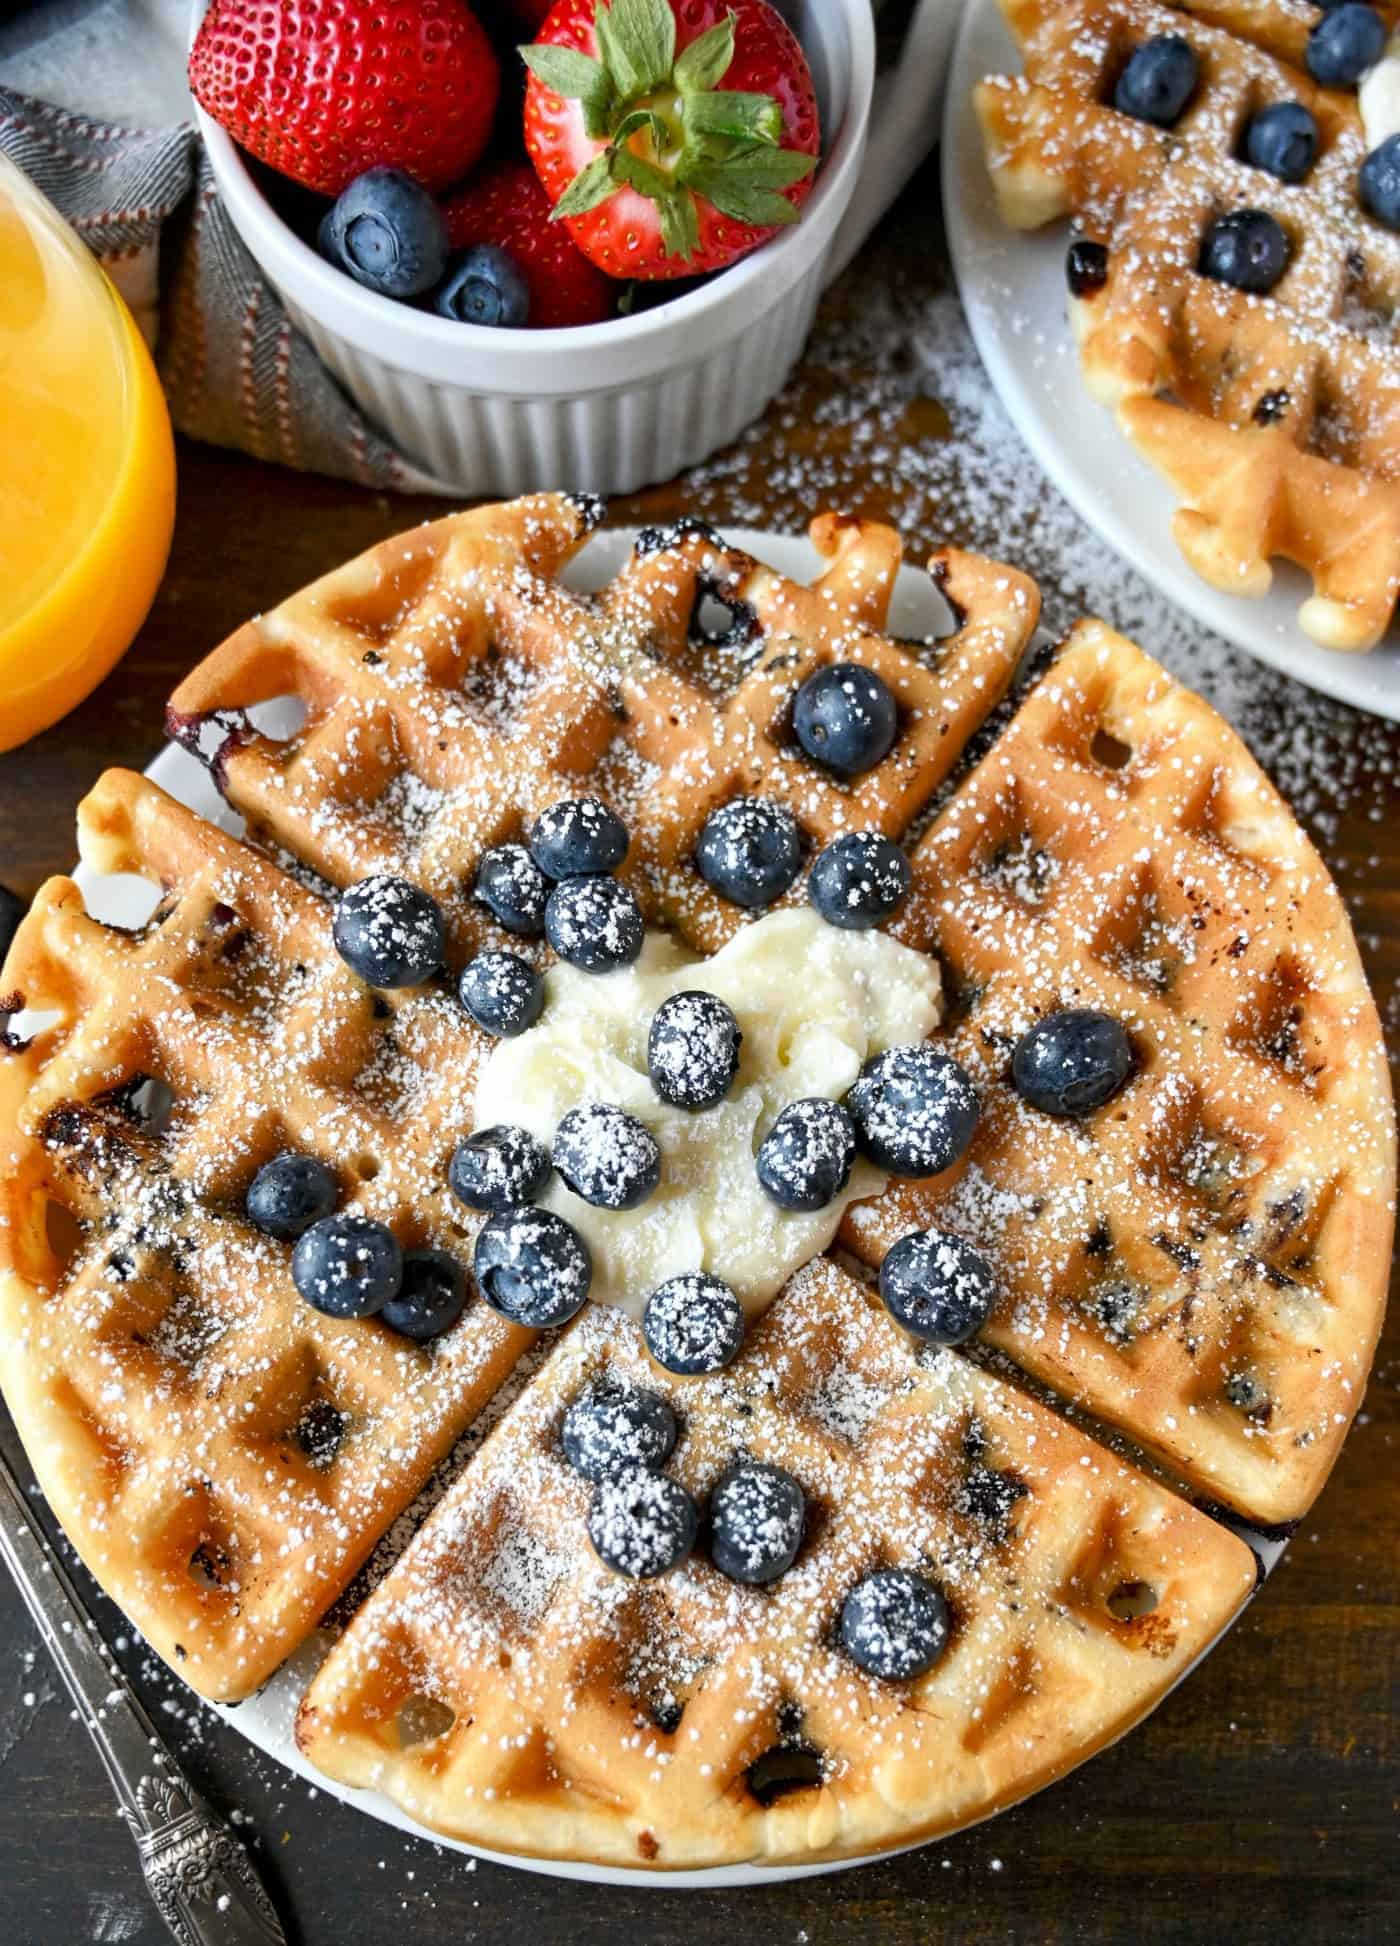 Blueberry waffles with whipped cream, blueberries, and powdered sugar.